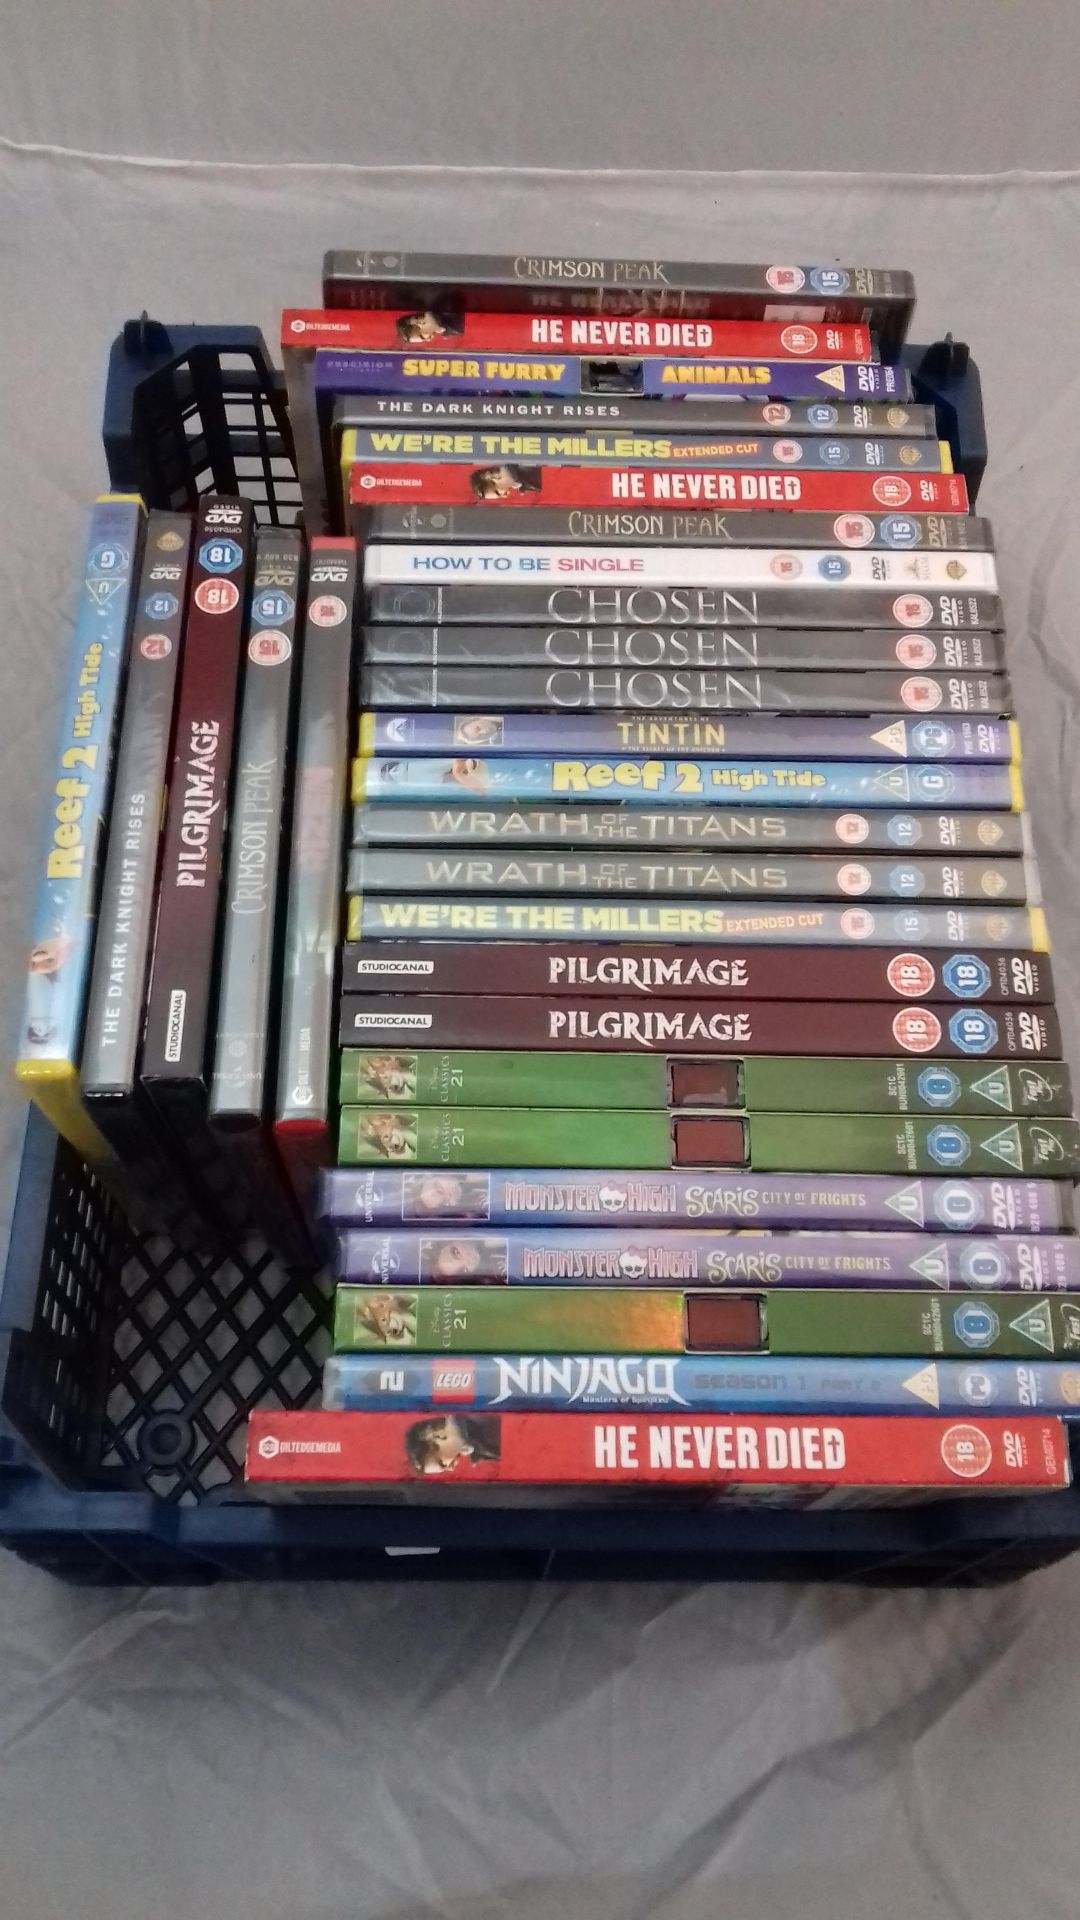 Approx 30 Sealed Dvd’s To Include Reef 2, The Dark Knight Rises, Pilgrimage, Crimson Peak.